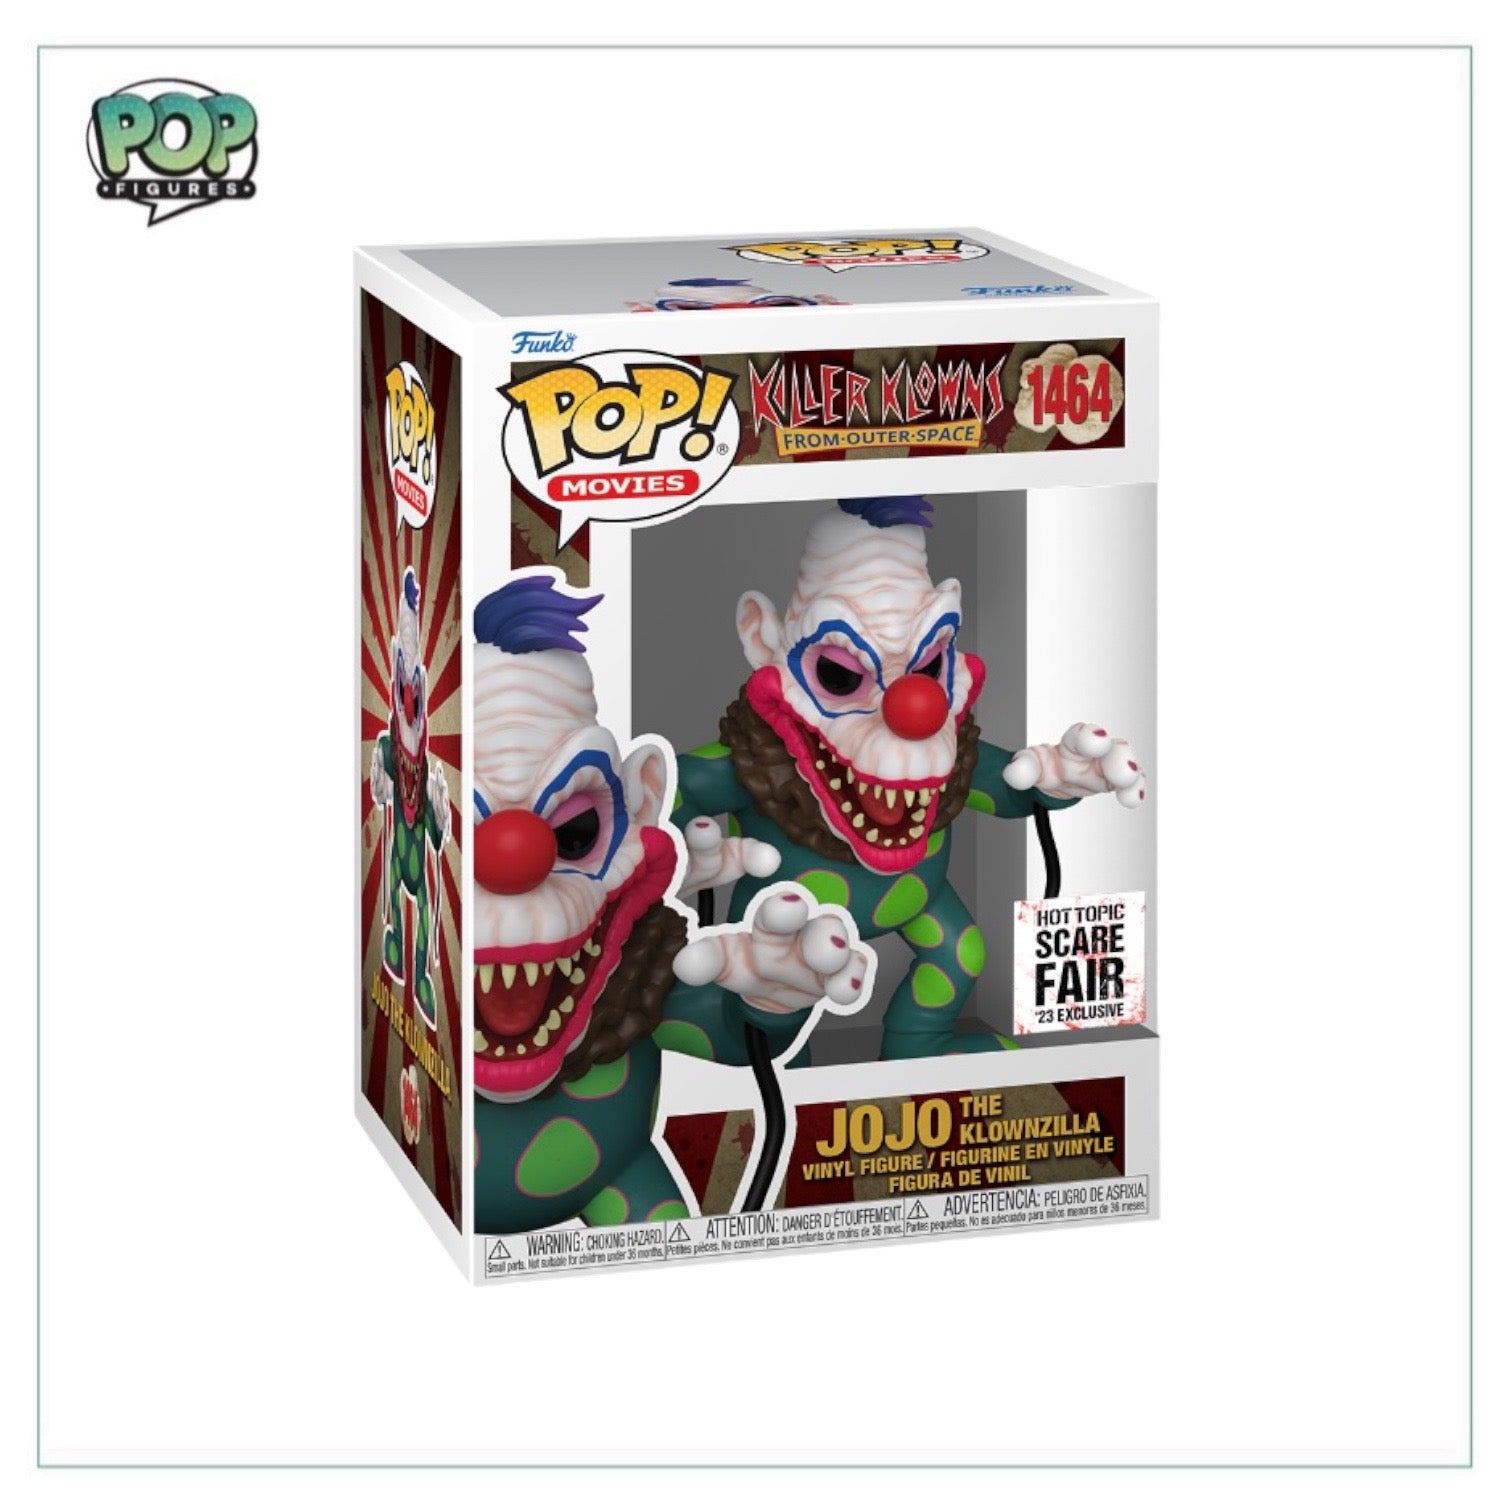 Jojo The Klownzilla #1464 Funko Pop! - Killer Klowns from Outer Space - Hot Topic Scare Fair 2023 Exclusive